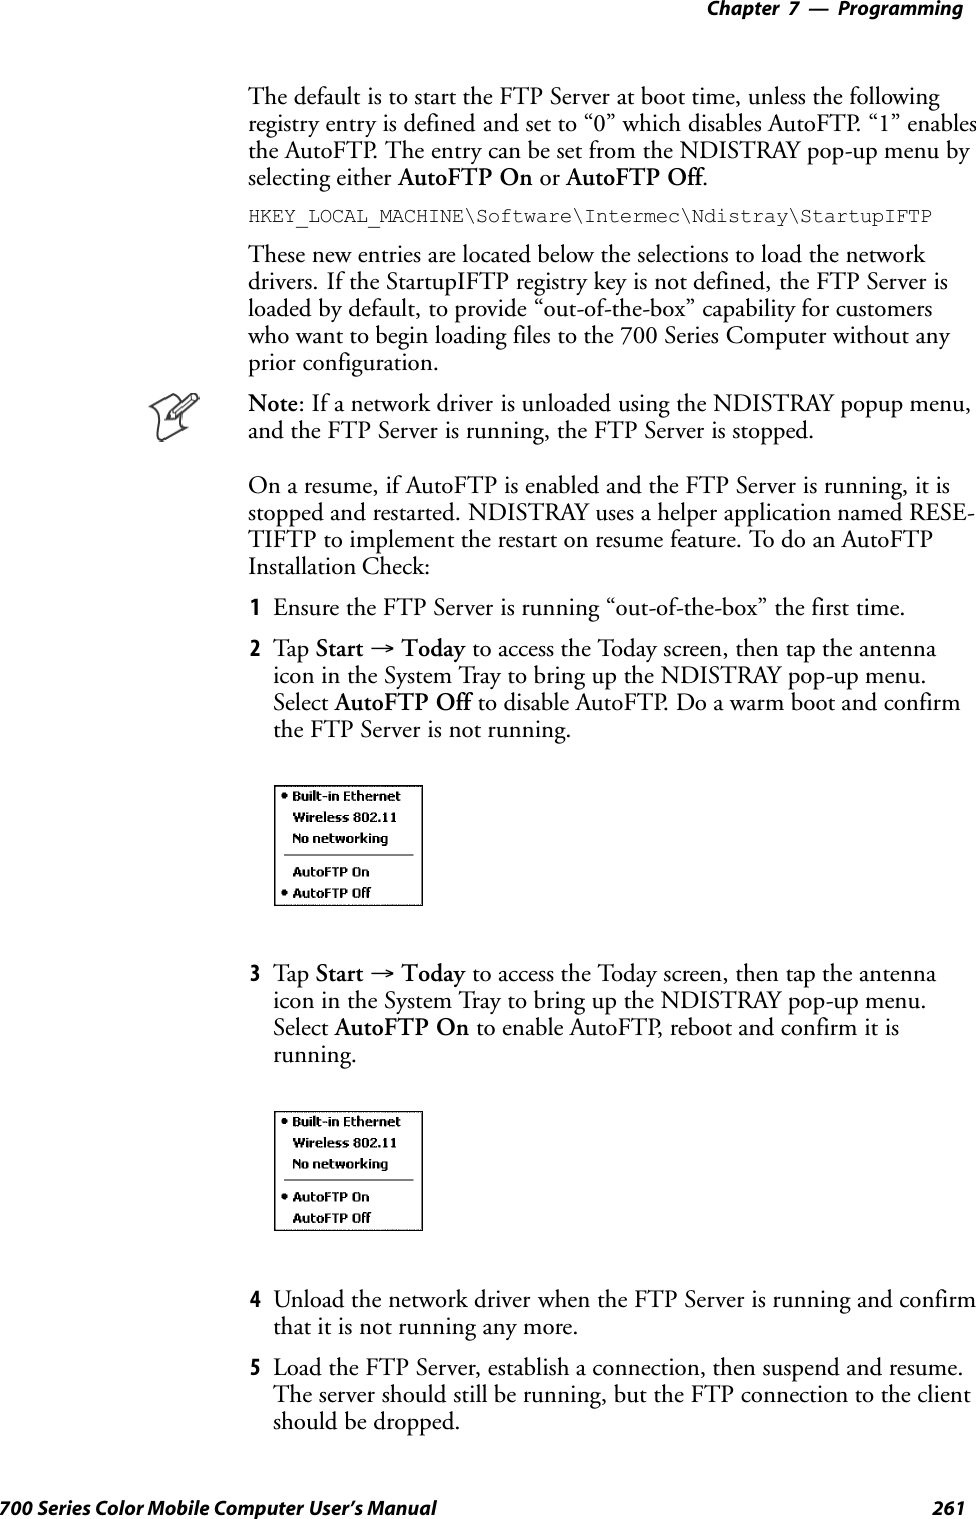 Programming—Chapter 7261700 Series Color Mobile Computer User’s ManualThe default is to start the FTP Server at boot time, unless the followingregistry entry is defined and set to “0” which disables AutoFTP. “1” enablesthe AutoFTP. The entry can be set from the NDISTRAY pop-up menu byselecting either AutoFTP On or AutoFTP Off.HKEY_LOCAL_MACHINE\Software\Intermec\Ndistray\StartupIFTPThese new entries are located below the selections to load the networkdrivers. If the StartupIFTP registry key is not defined, the FTP Server isloaded by default, to provide “out-of-the-box” capability for customerswho want to begin loading files to the 700 Series Computer without anyprior configuration.Note: If a network driver is unloaded using the NDISTRAY popup menu,and the FTP Server is running, the FTP Server is stopped.On a resume, if AutoFTP is enabled and the FTP Server is running, it isstopped and restarted. NDISTRAY uses a helper application named RESE-TIFTP to implement the restart on resume feature. To do an AutoFTPInstallation Check:1Ensure the FTP Server is running “out-of-the-box” the first time.2Tap Start →Today to access the Today screen, then tap the antennaicon in the System Tray to bring up the NDISTRAY pop-up menu.Select AutoFTP Off to disable AutoFTP. Do a warm boot and confirmthe FTP Server is not running.3Tap Start →Today to access the Today screen, then tap the antennaicon in the System Tray to bring up the NDISTRAY pop-up menu.Select AutoFTP On to enable AutoFTP, reboot and confirm it isrunning.4Unload the network driver when the FTP Server is running and confirmthat it is not running any more.5Load the FTP Server, establish a connection, then suspend and resume.The server should still be running, but the FTP connection to the clientshould be dropped.